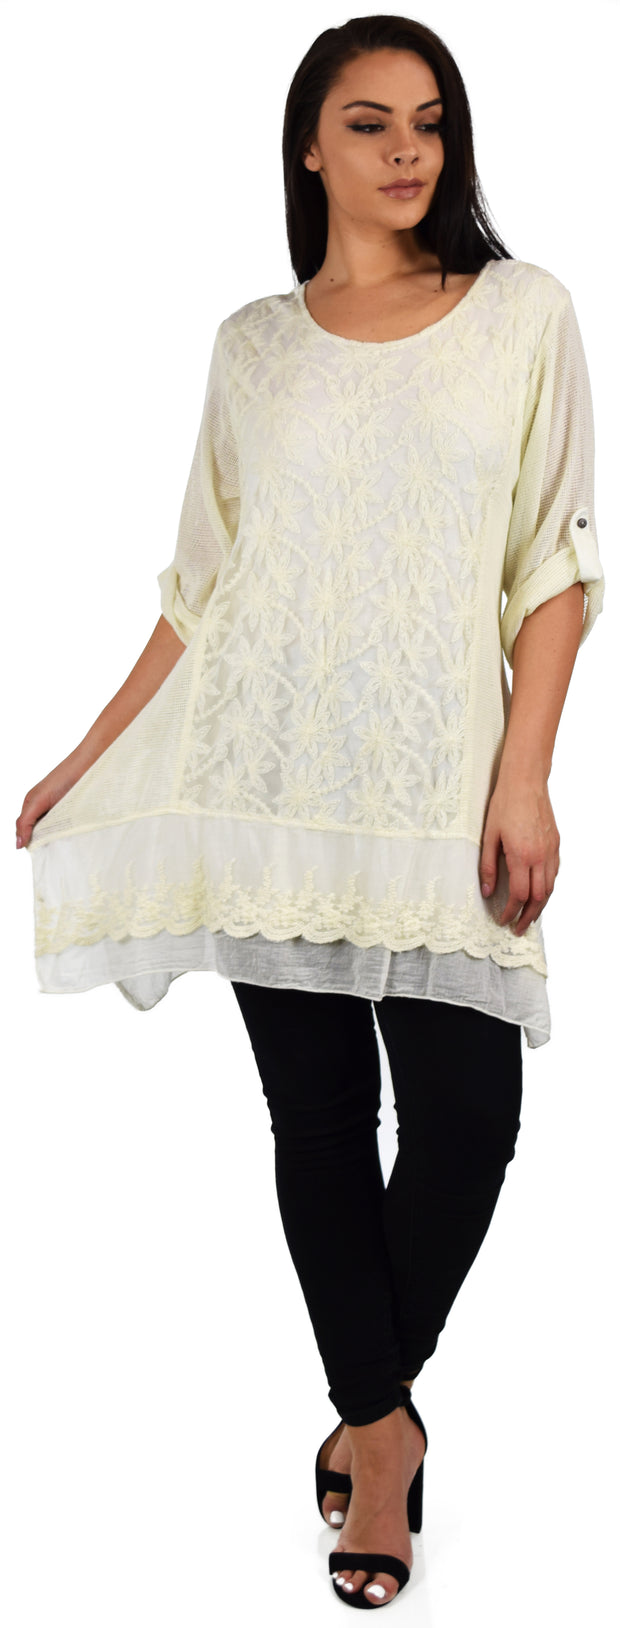 Zopali Women's Plus Size Netted Embroidered Lace Blouse Top w/Roll up Sleeves